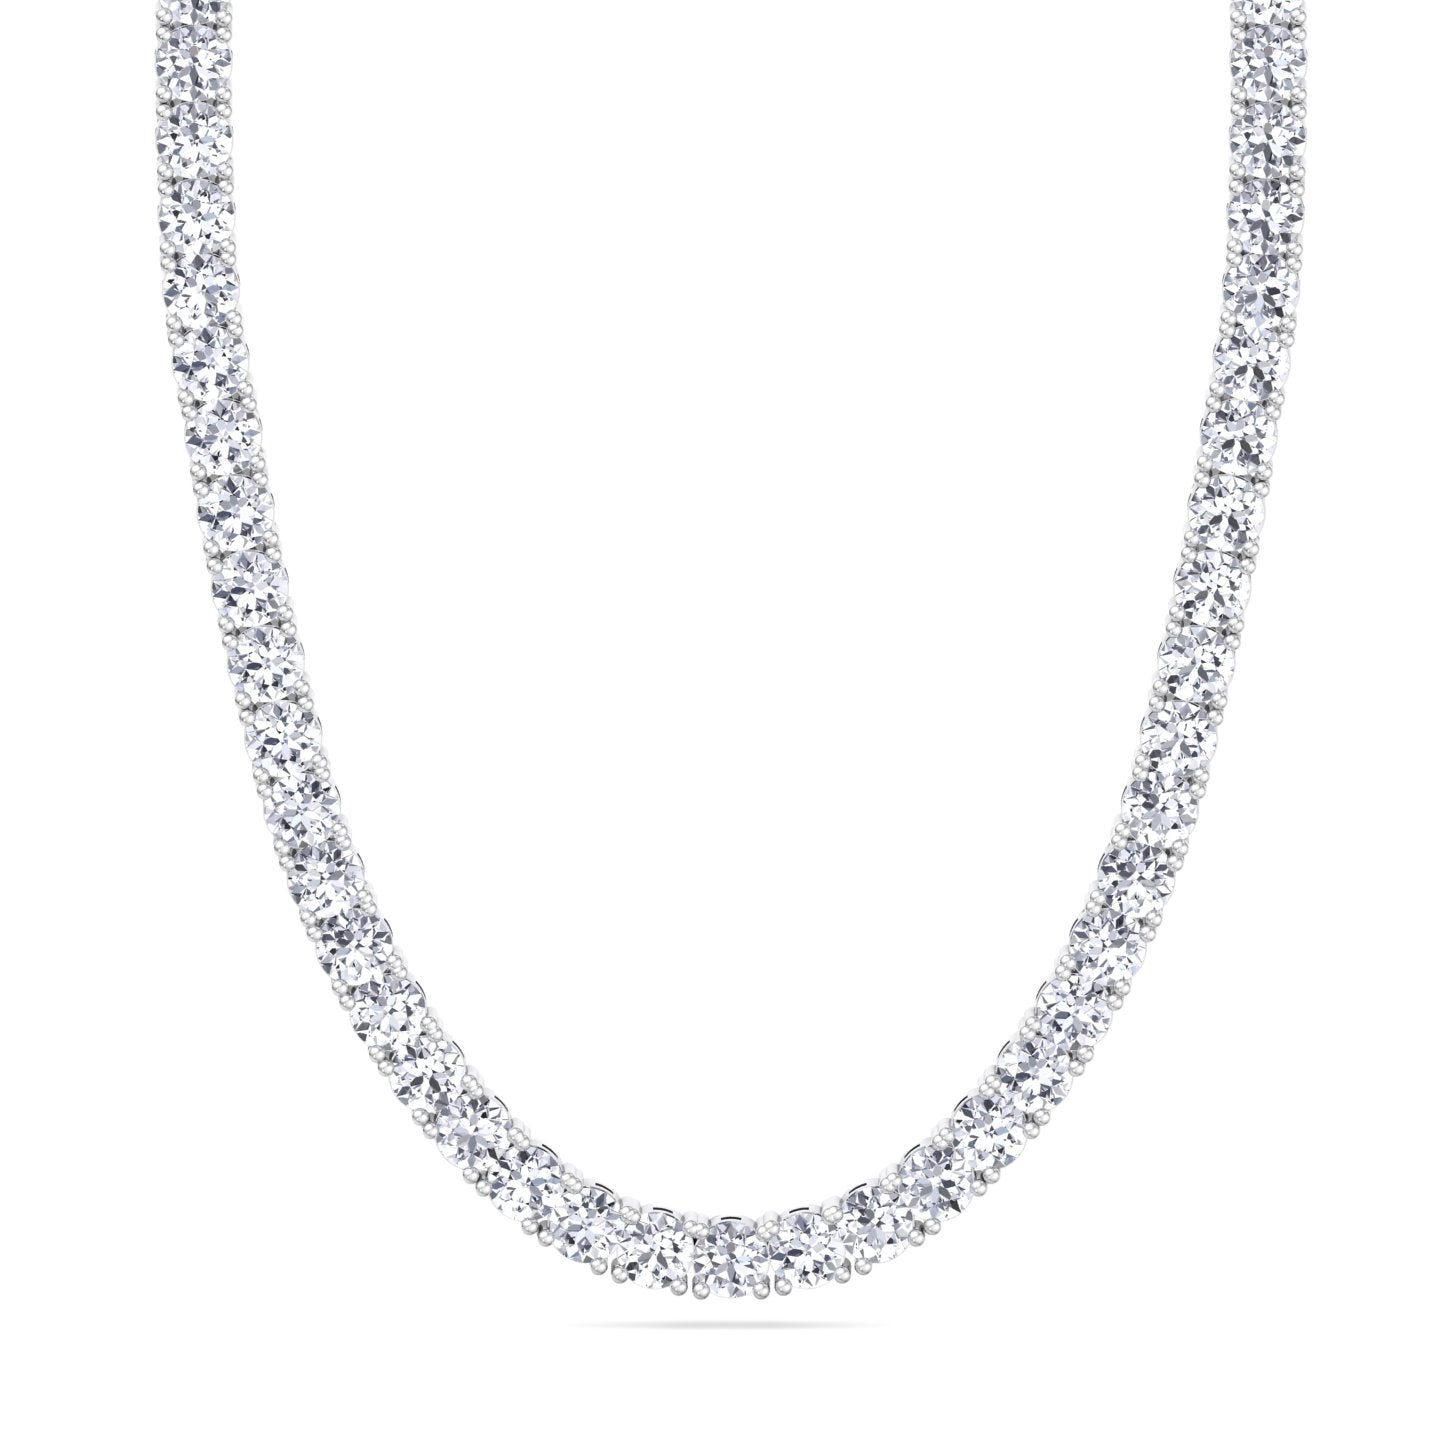 60 Carat Rounded Bezel Solitaire Diamond Necklace - Marmalade